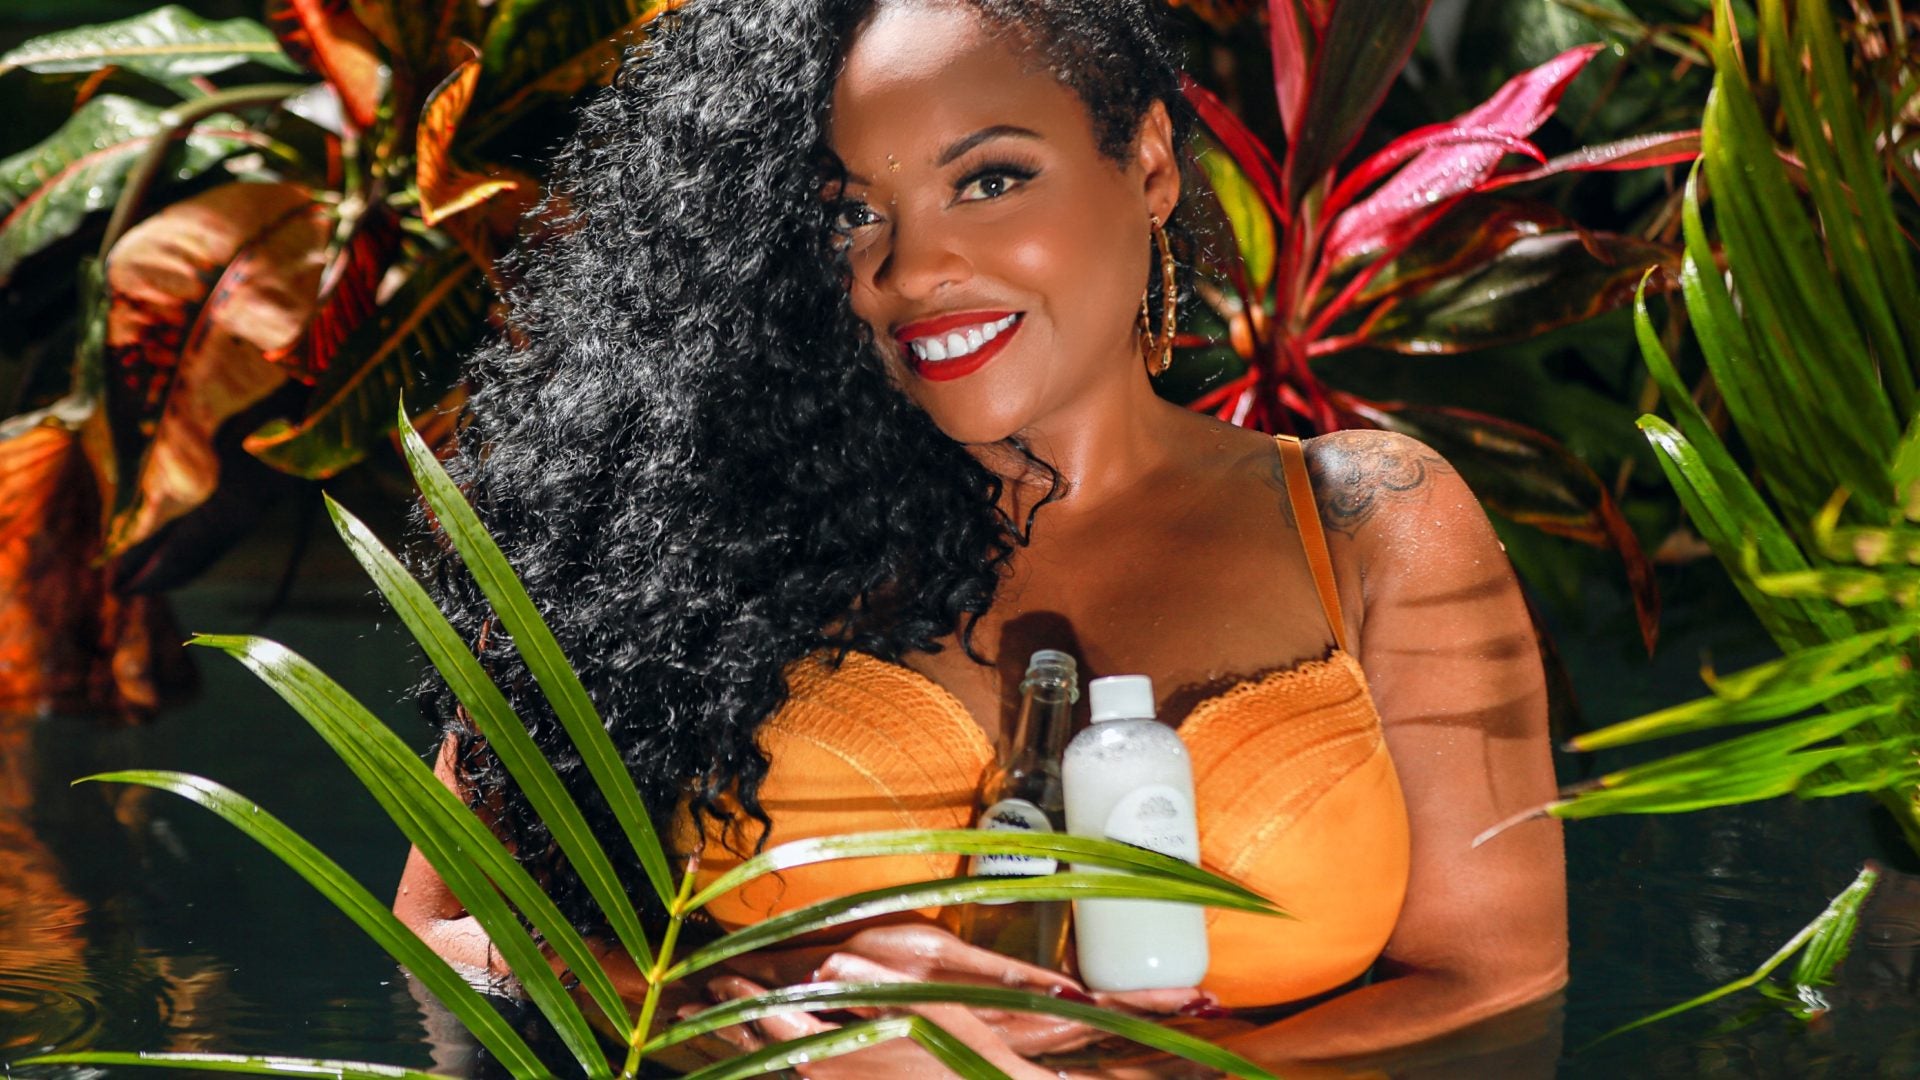 How Nikki Brooks Turned Instagram Buzz Into An ‘Overnight Success’ Home & Body Care Brand